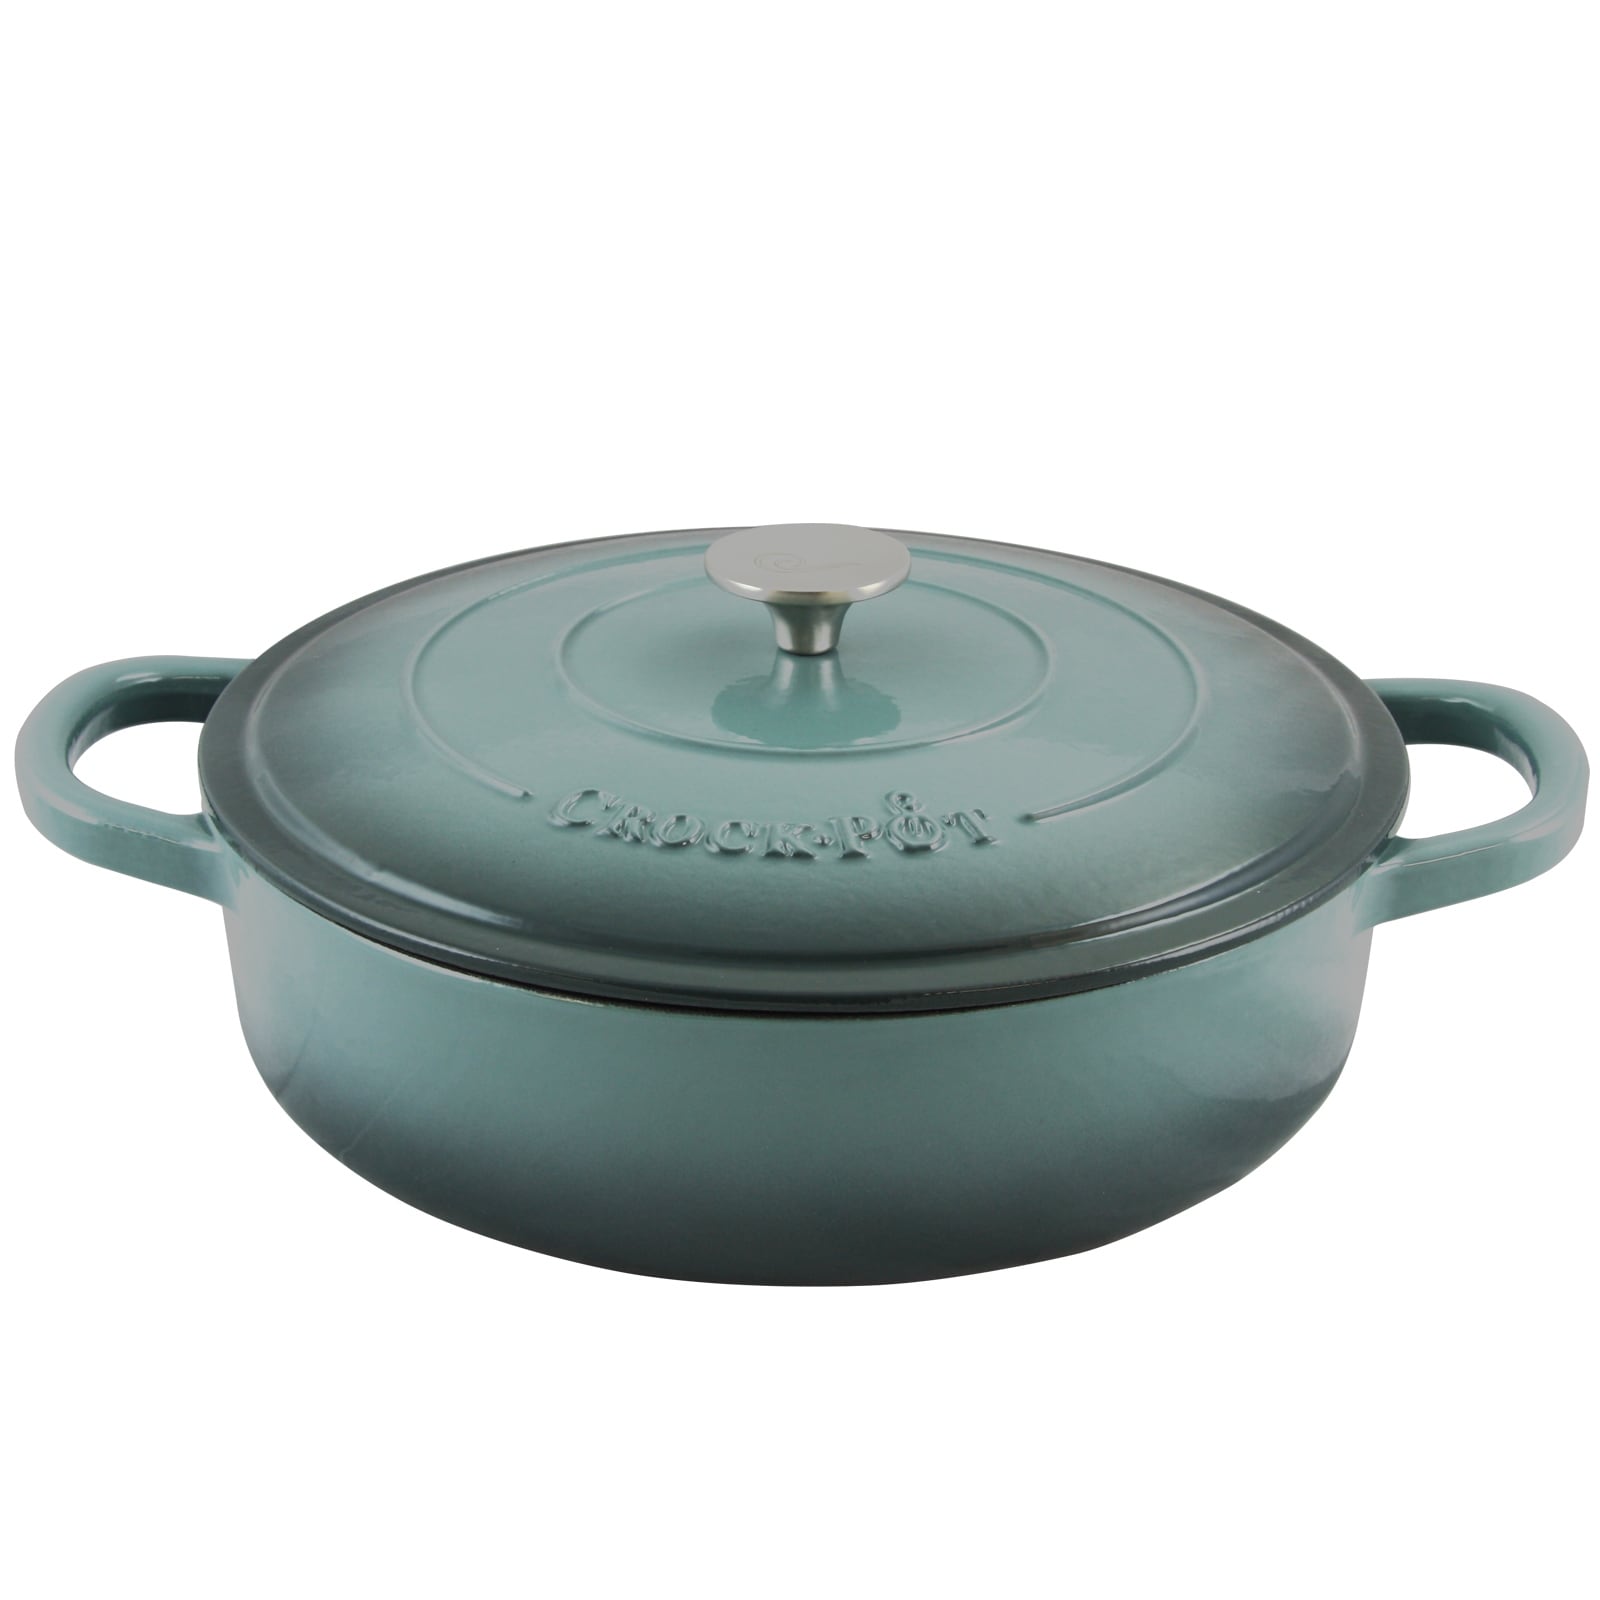 https://ak1.ostkcdn.com/images/products/is/images/direct/3f53d12b9984fad943e48ff952cd64ff0d28fbd1/Enameled-5-Quart-Cast-Iron-Round-Braising-Pan-W--Lid-in-Ash.jpg